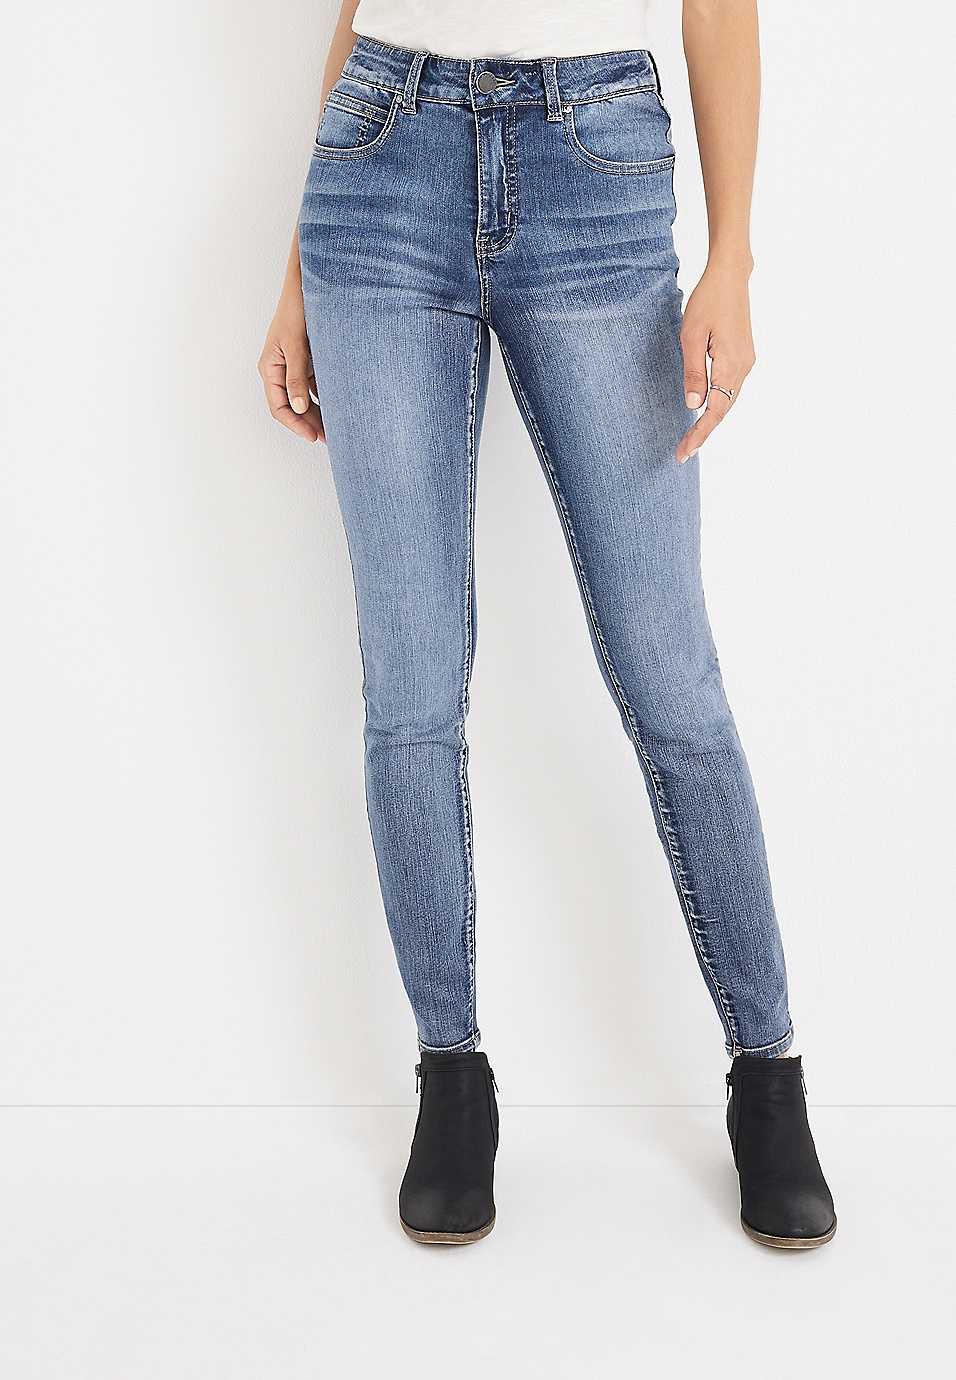 m jeans by maurices™ Super Soft Skinny High Rise Jegging